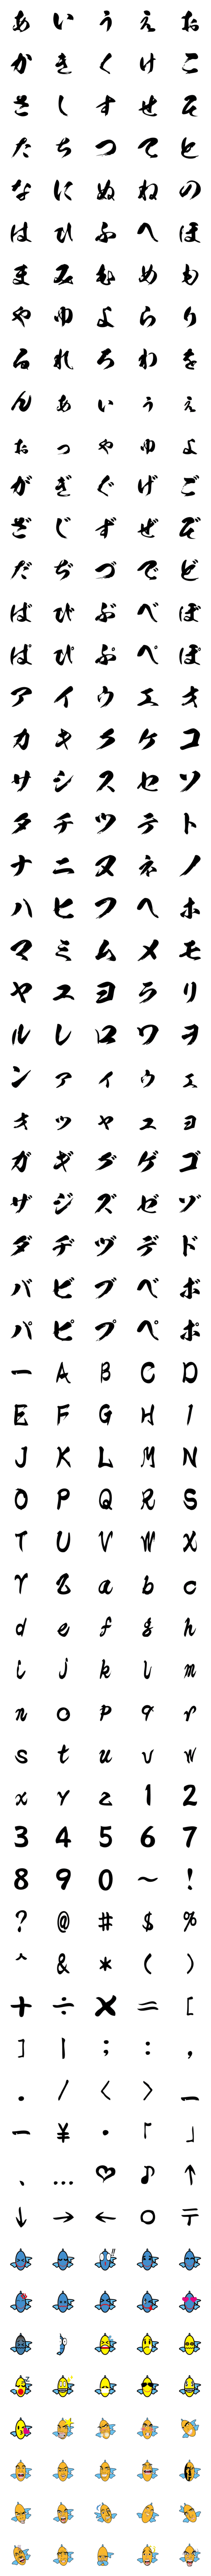 [LINE絵文字]釣り魚絵文字-勢いのある毛筆フォント-の画像一覧